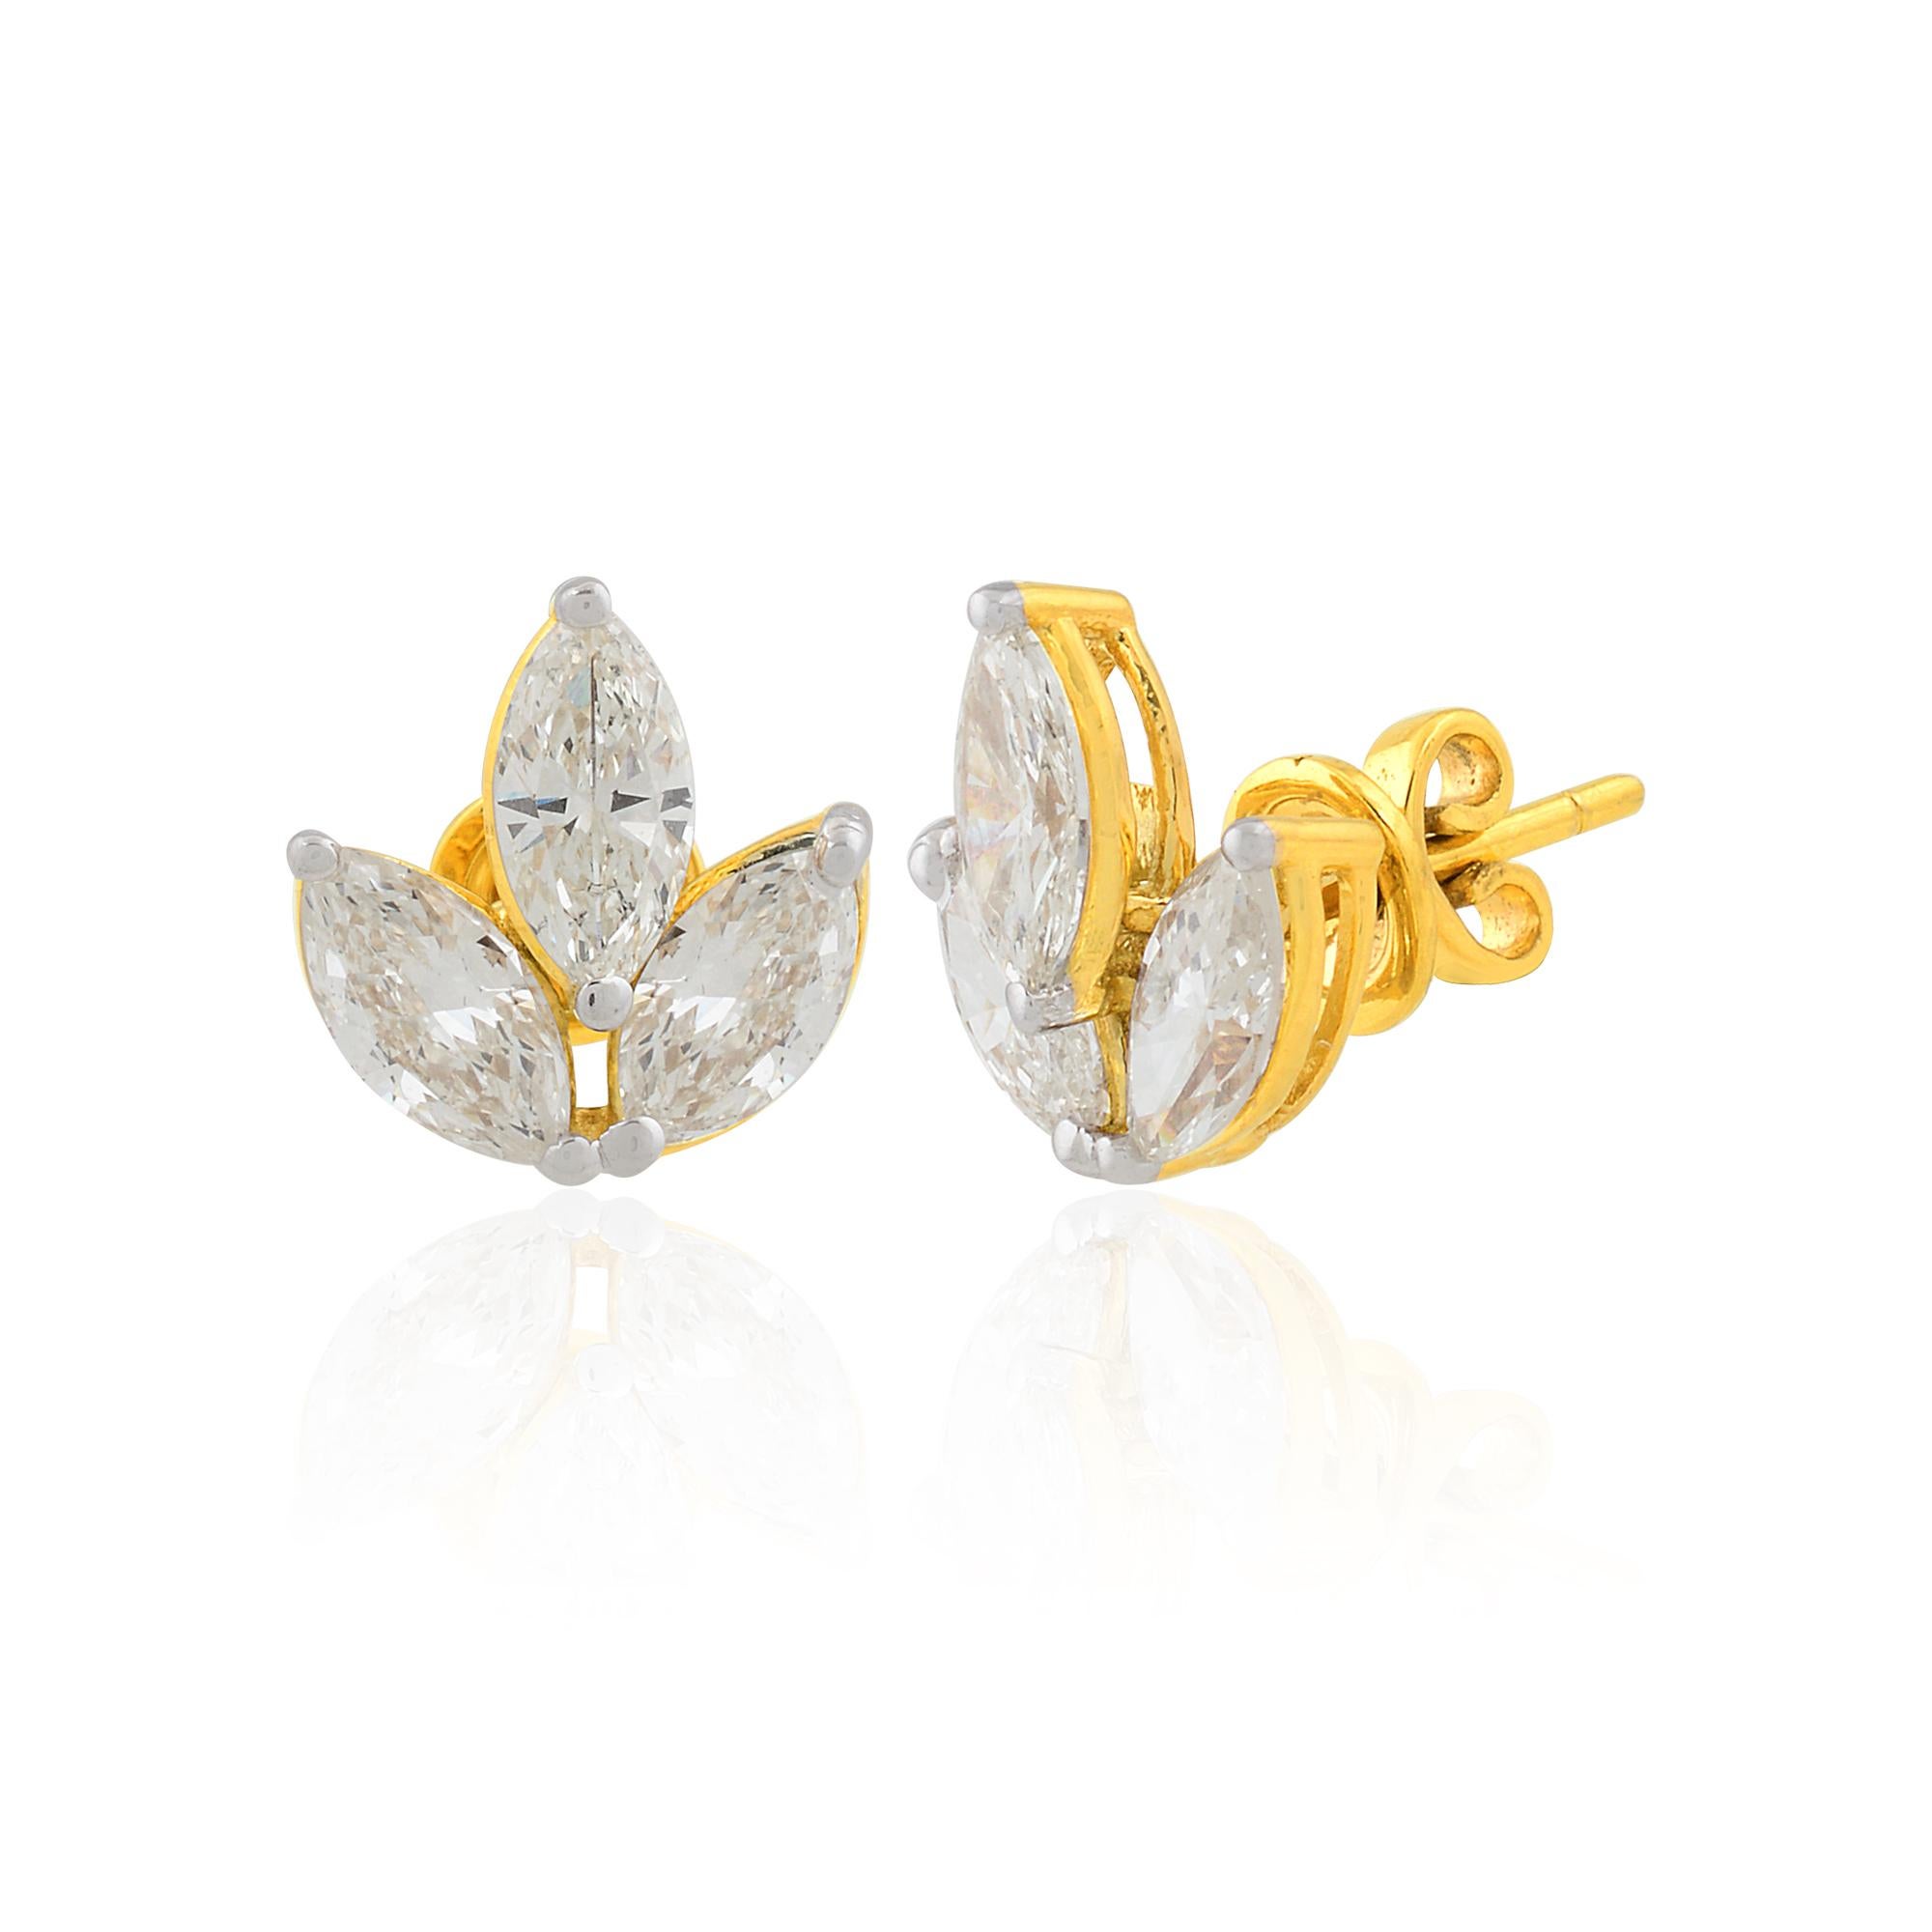 Crafted with precision and attention to detail, the earrings are fashioned in lustrous 14 Karat Yellow Gold, adding a warm and radiant glow to the design. The yellow gold setting provides the perfect backdrop for the diamonds, enhancing their